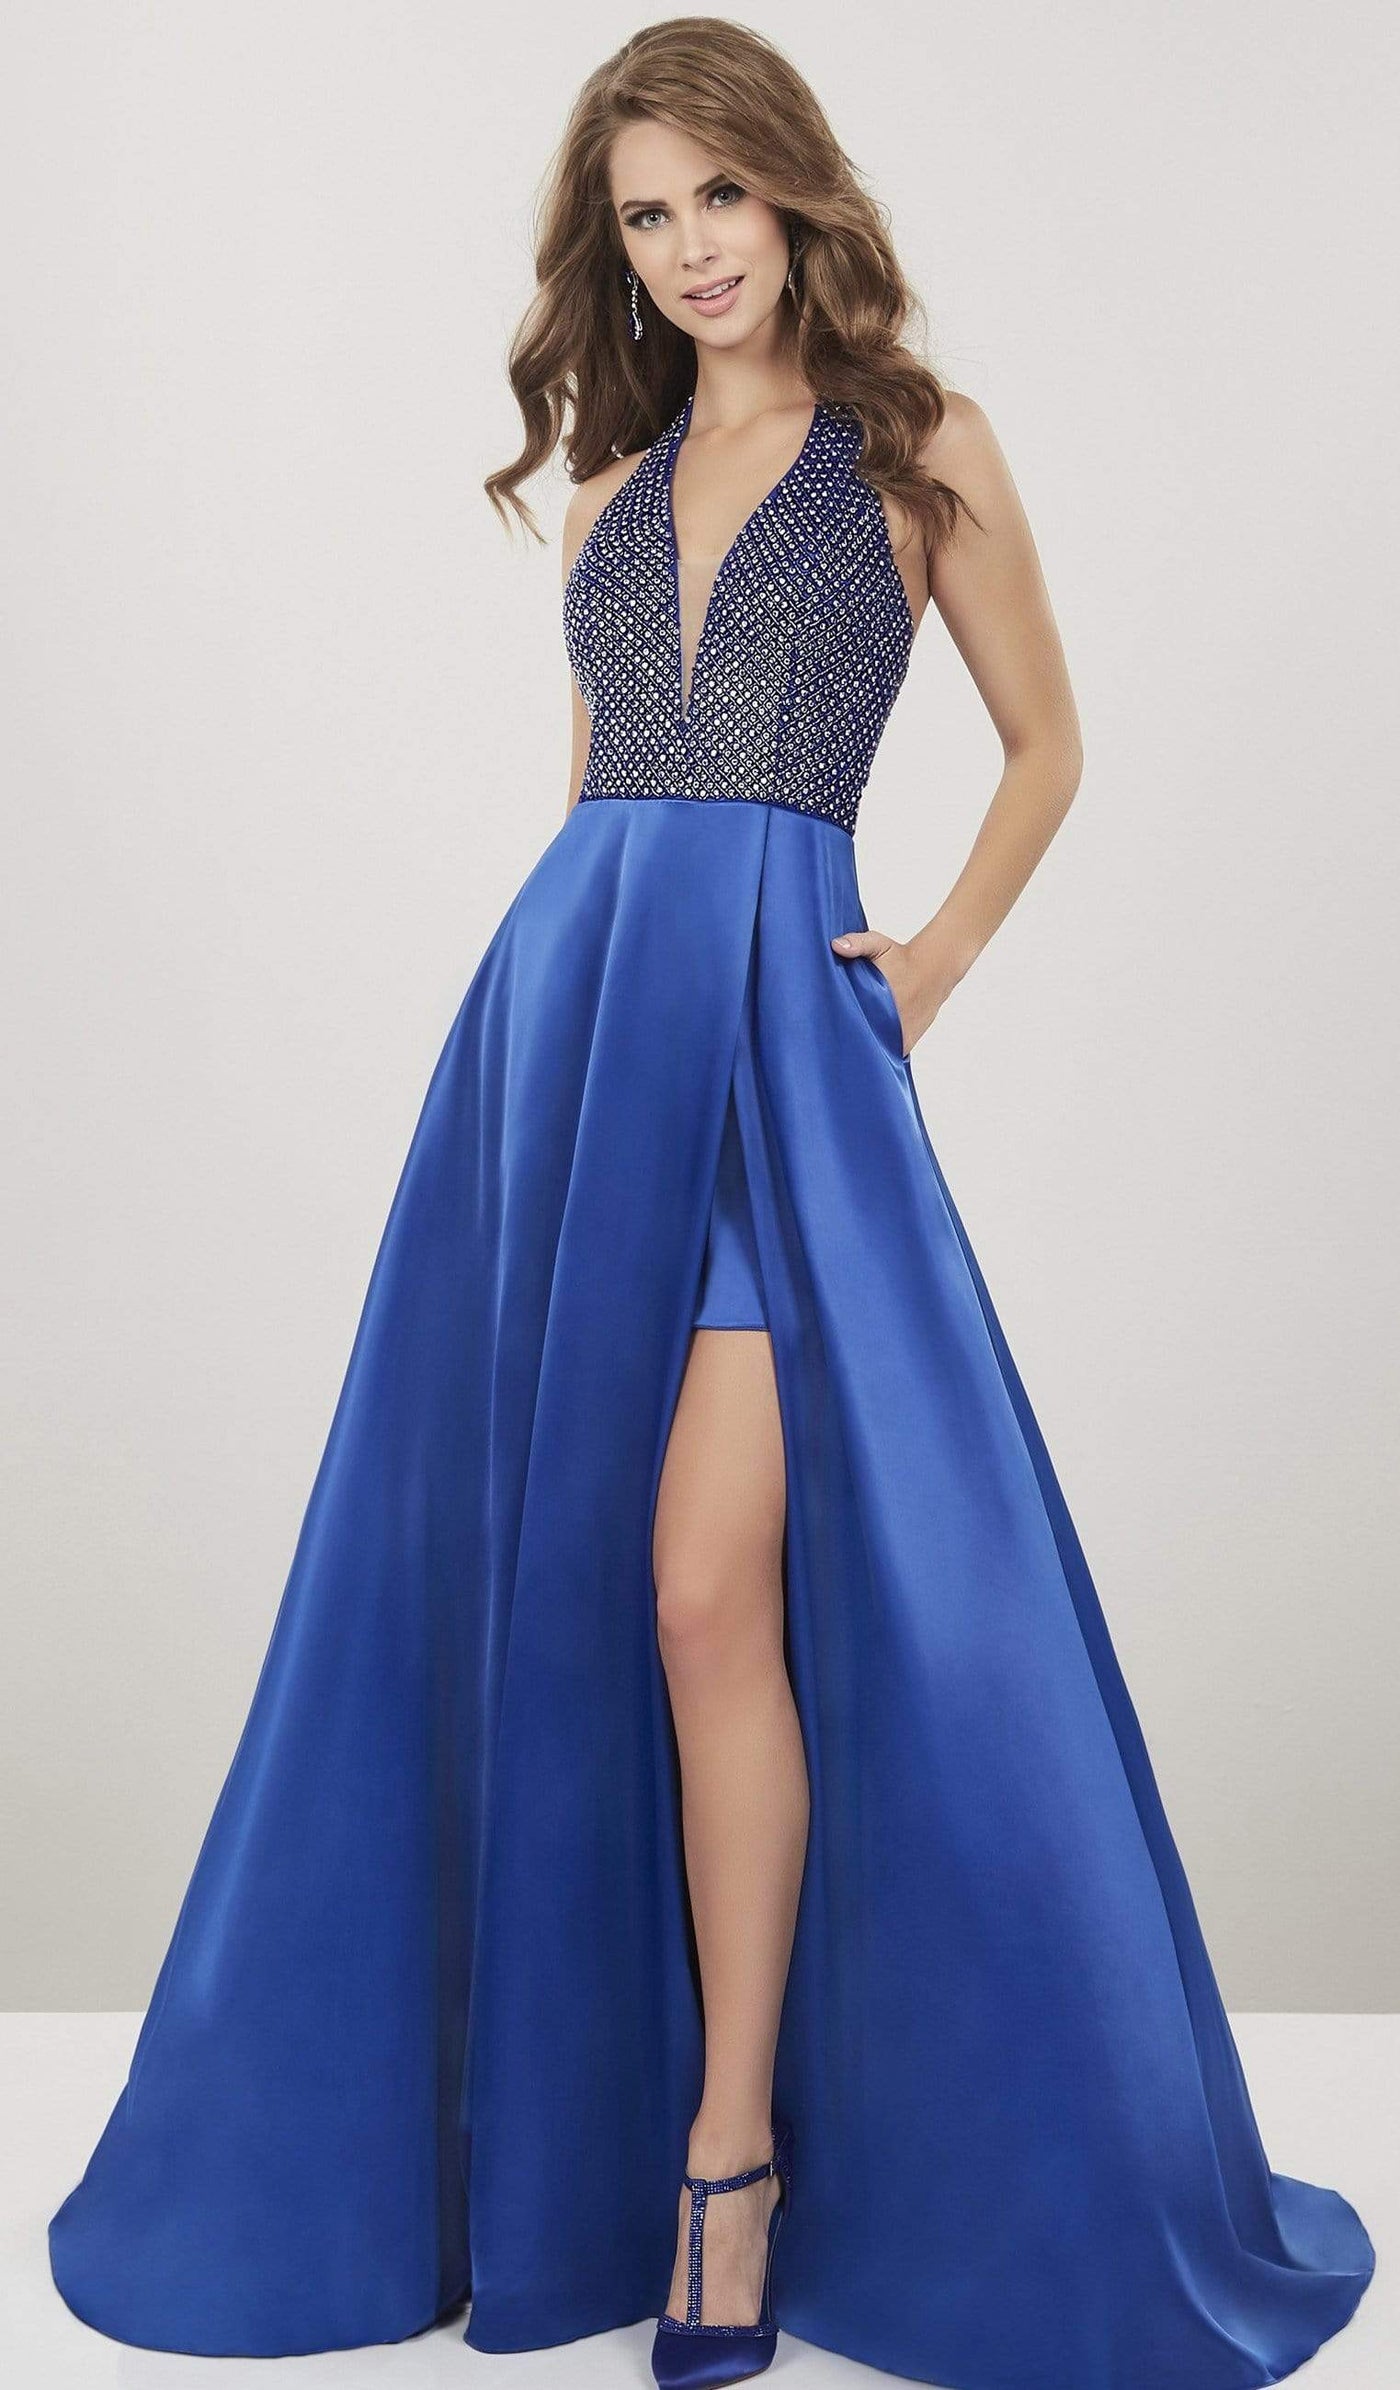 Panoply - 14929 Embellished Deep Halter V-neck Charmeuse A-line Gown Special Occasion Dress 0 / Royal